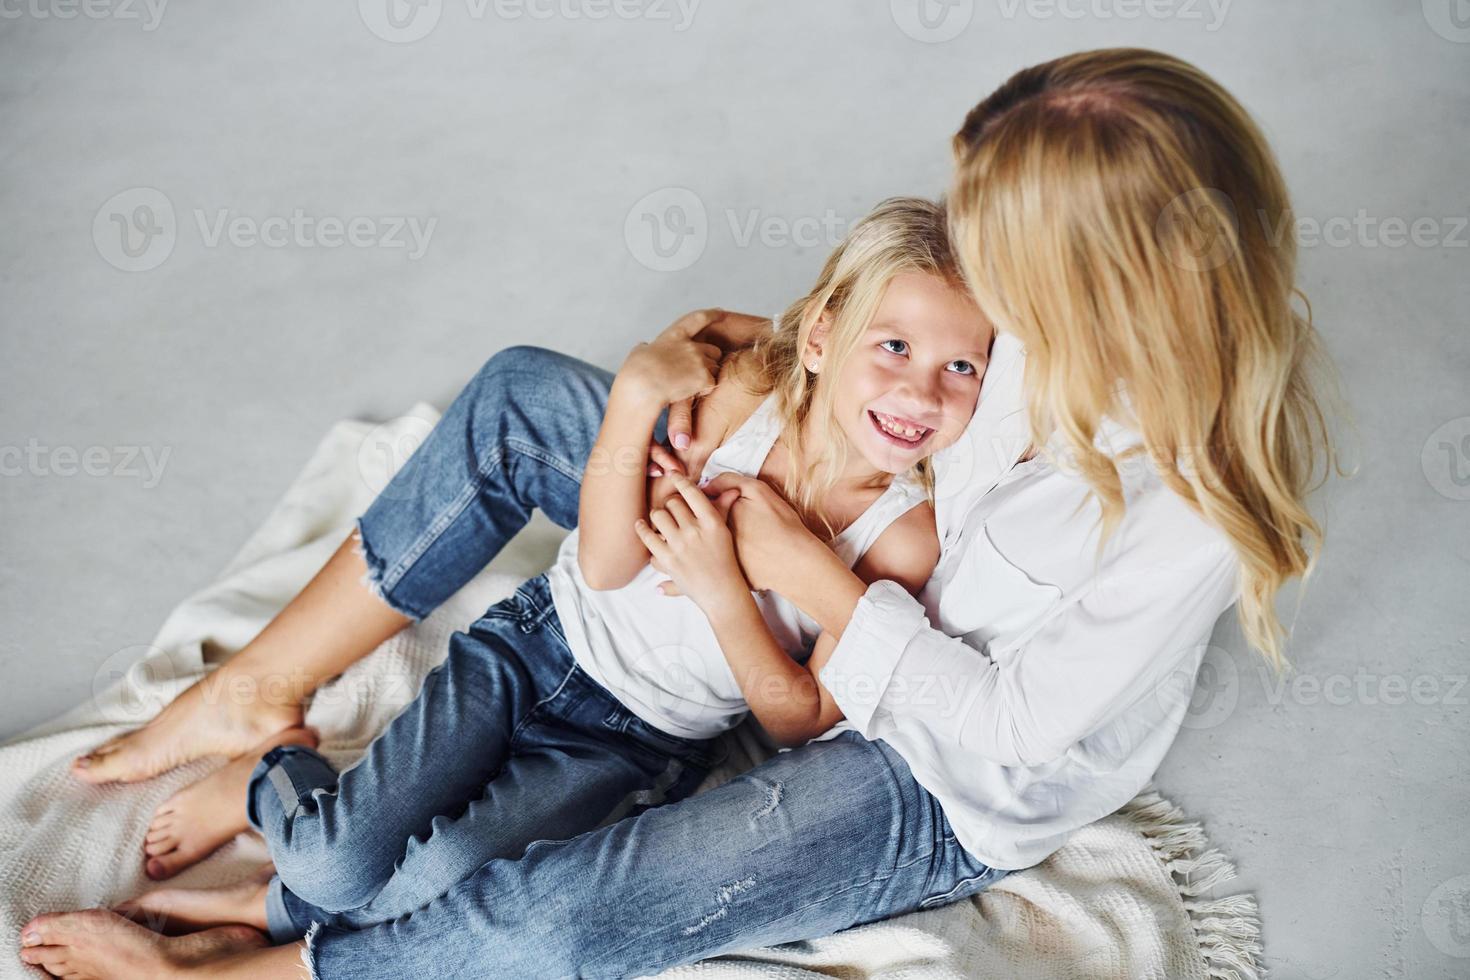 Mother with her daughter together is on the ground in the studio with white background photo